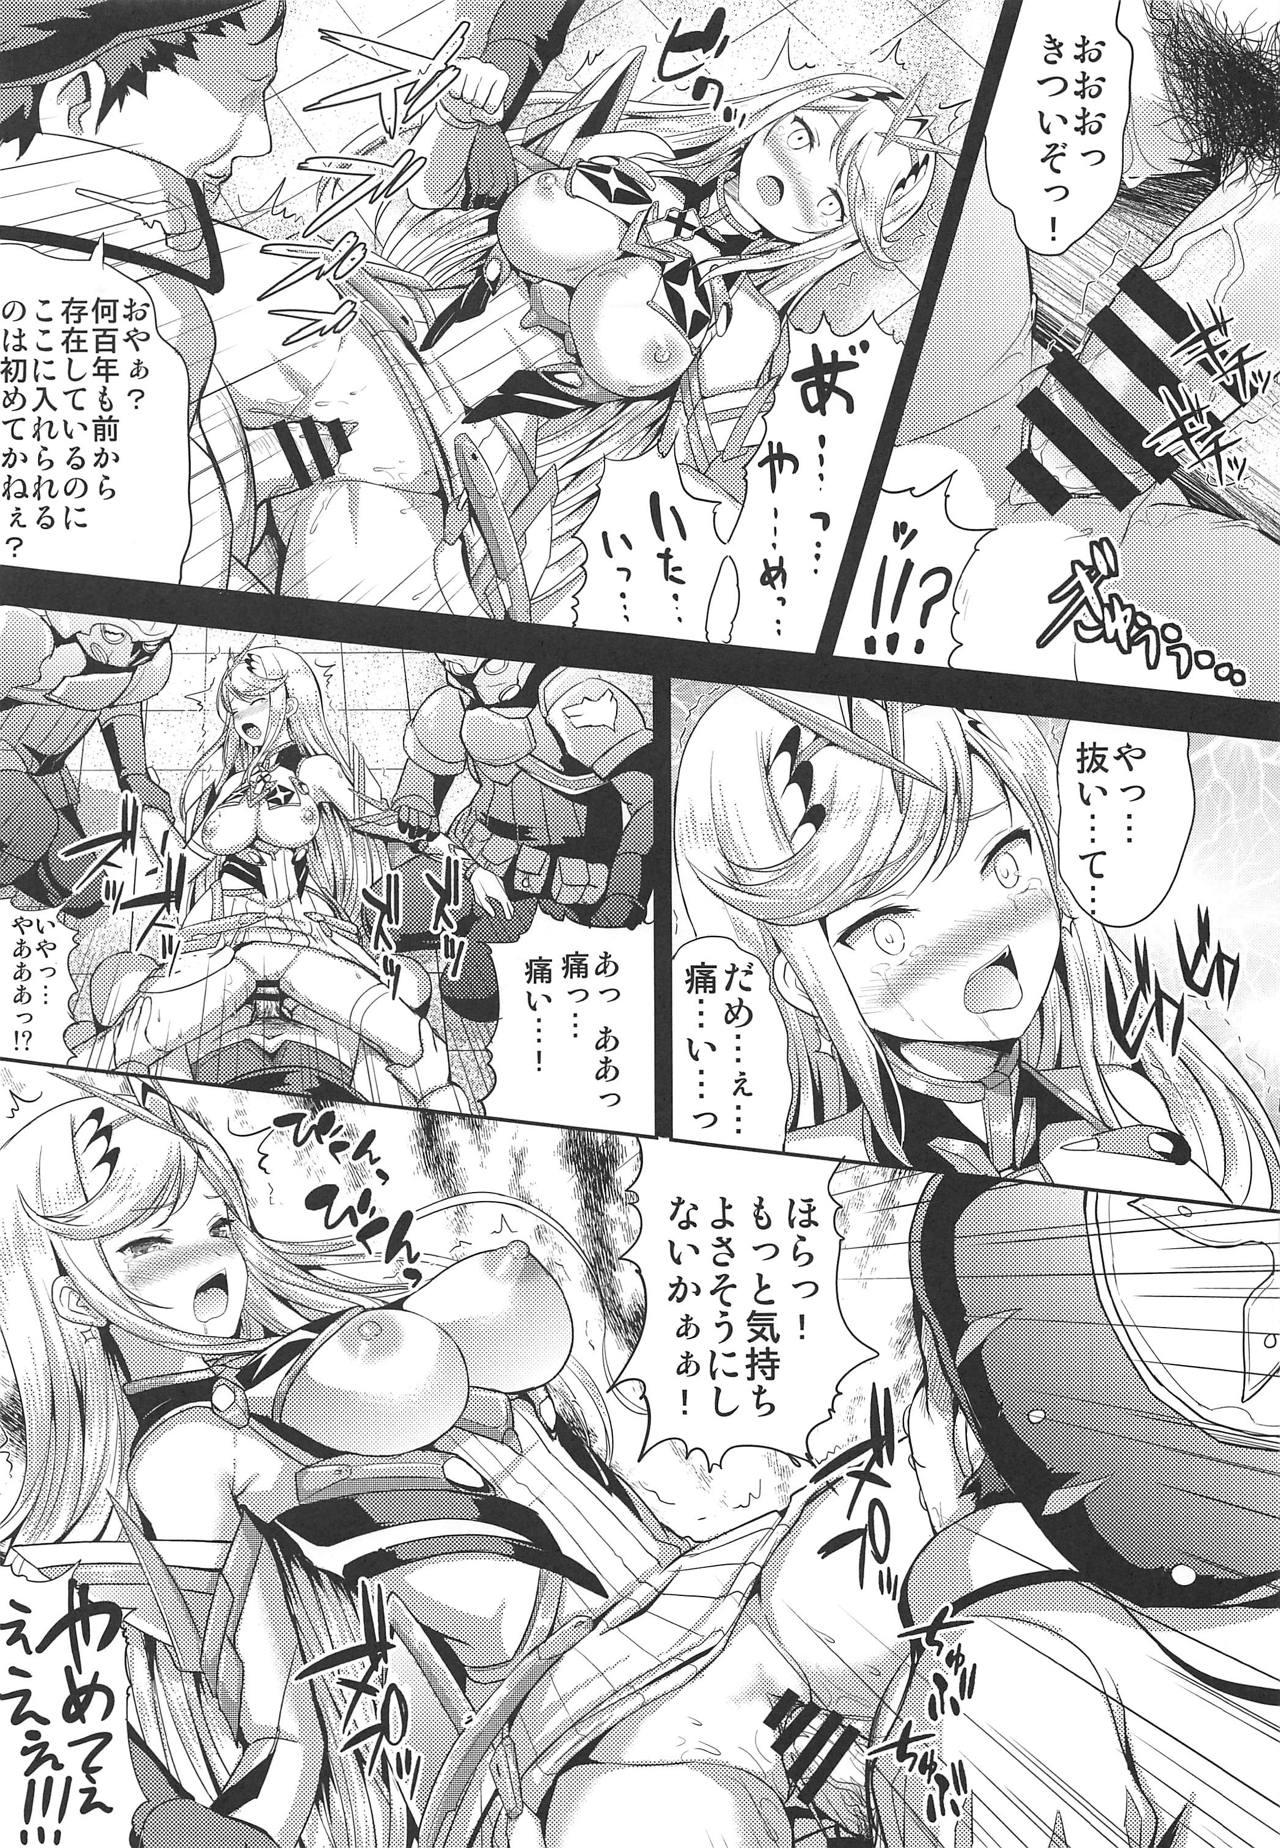 Ejaculation Hikari x Rape - Xenoblade chronicles 2 Onlyfans - Page 8